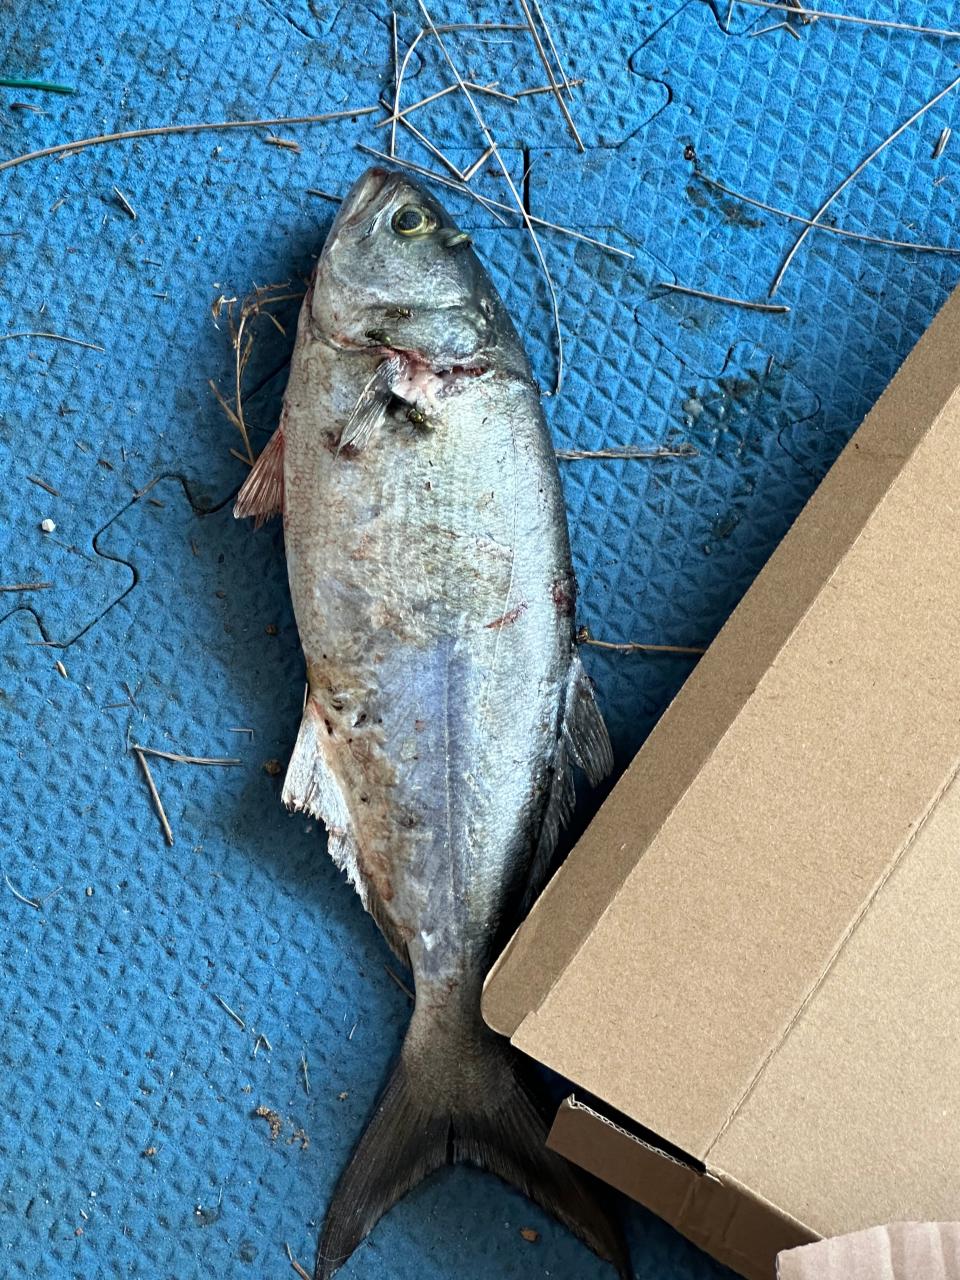 This fish fell out of the sky and smashed the windshield of a car owned by Jeff and Cynthia Levine of Atlantic Highlands.